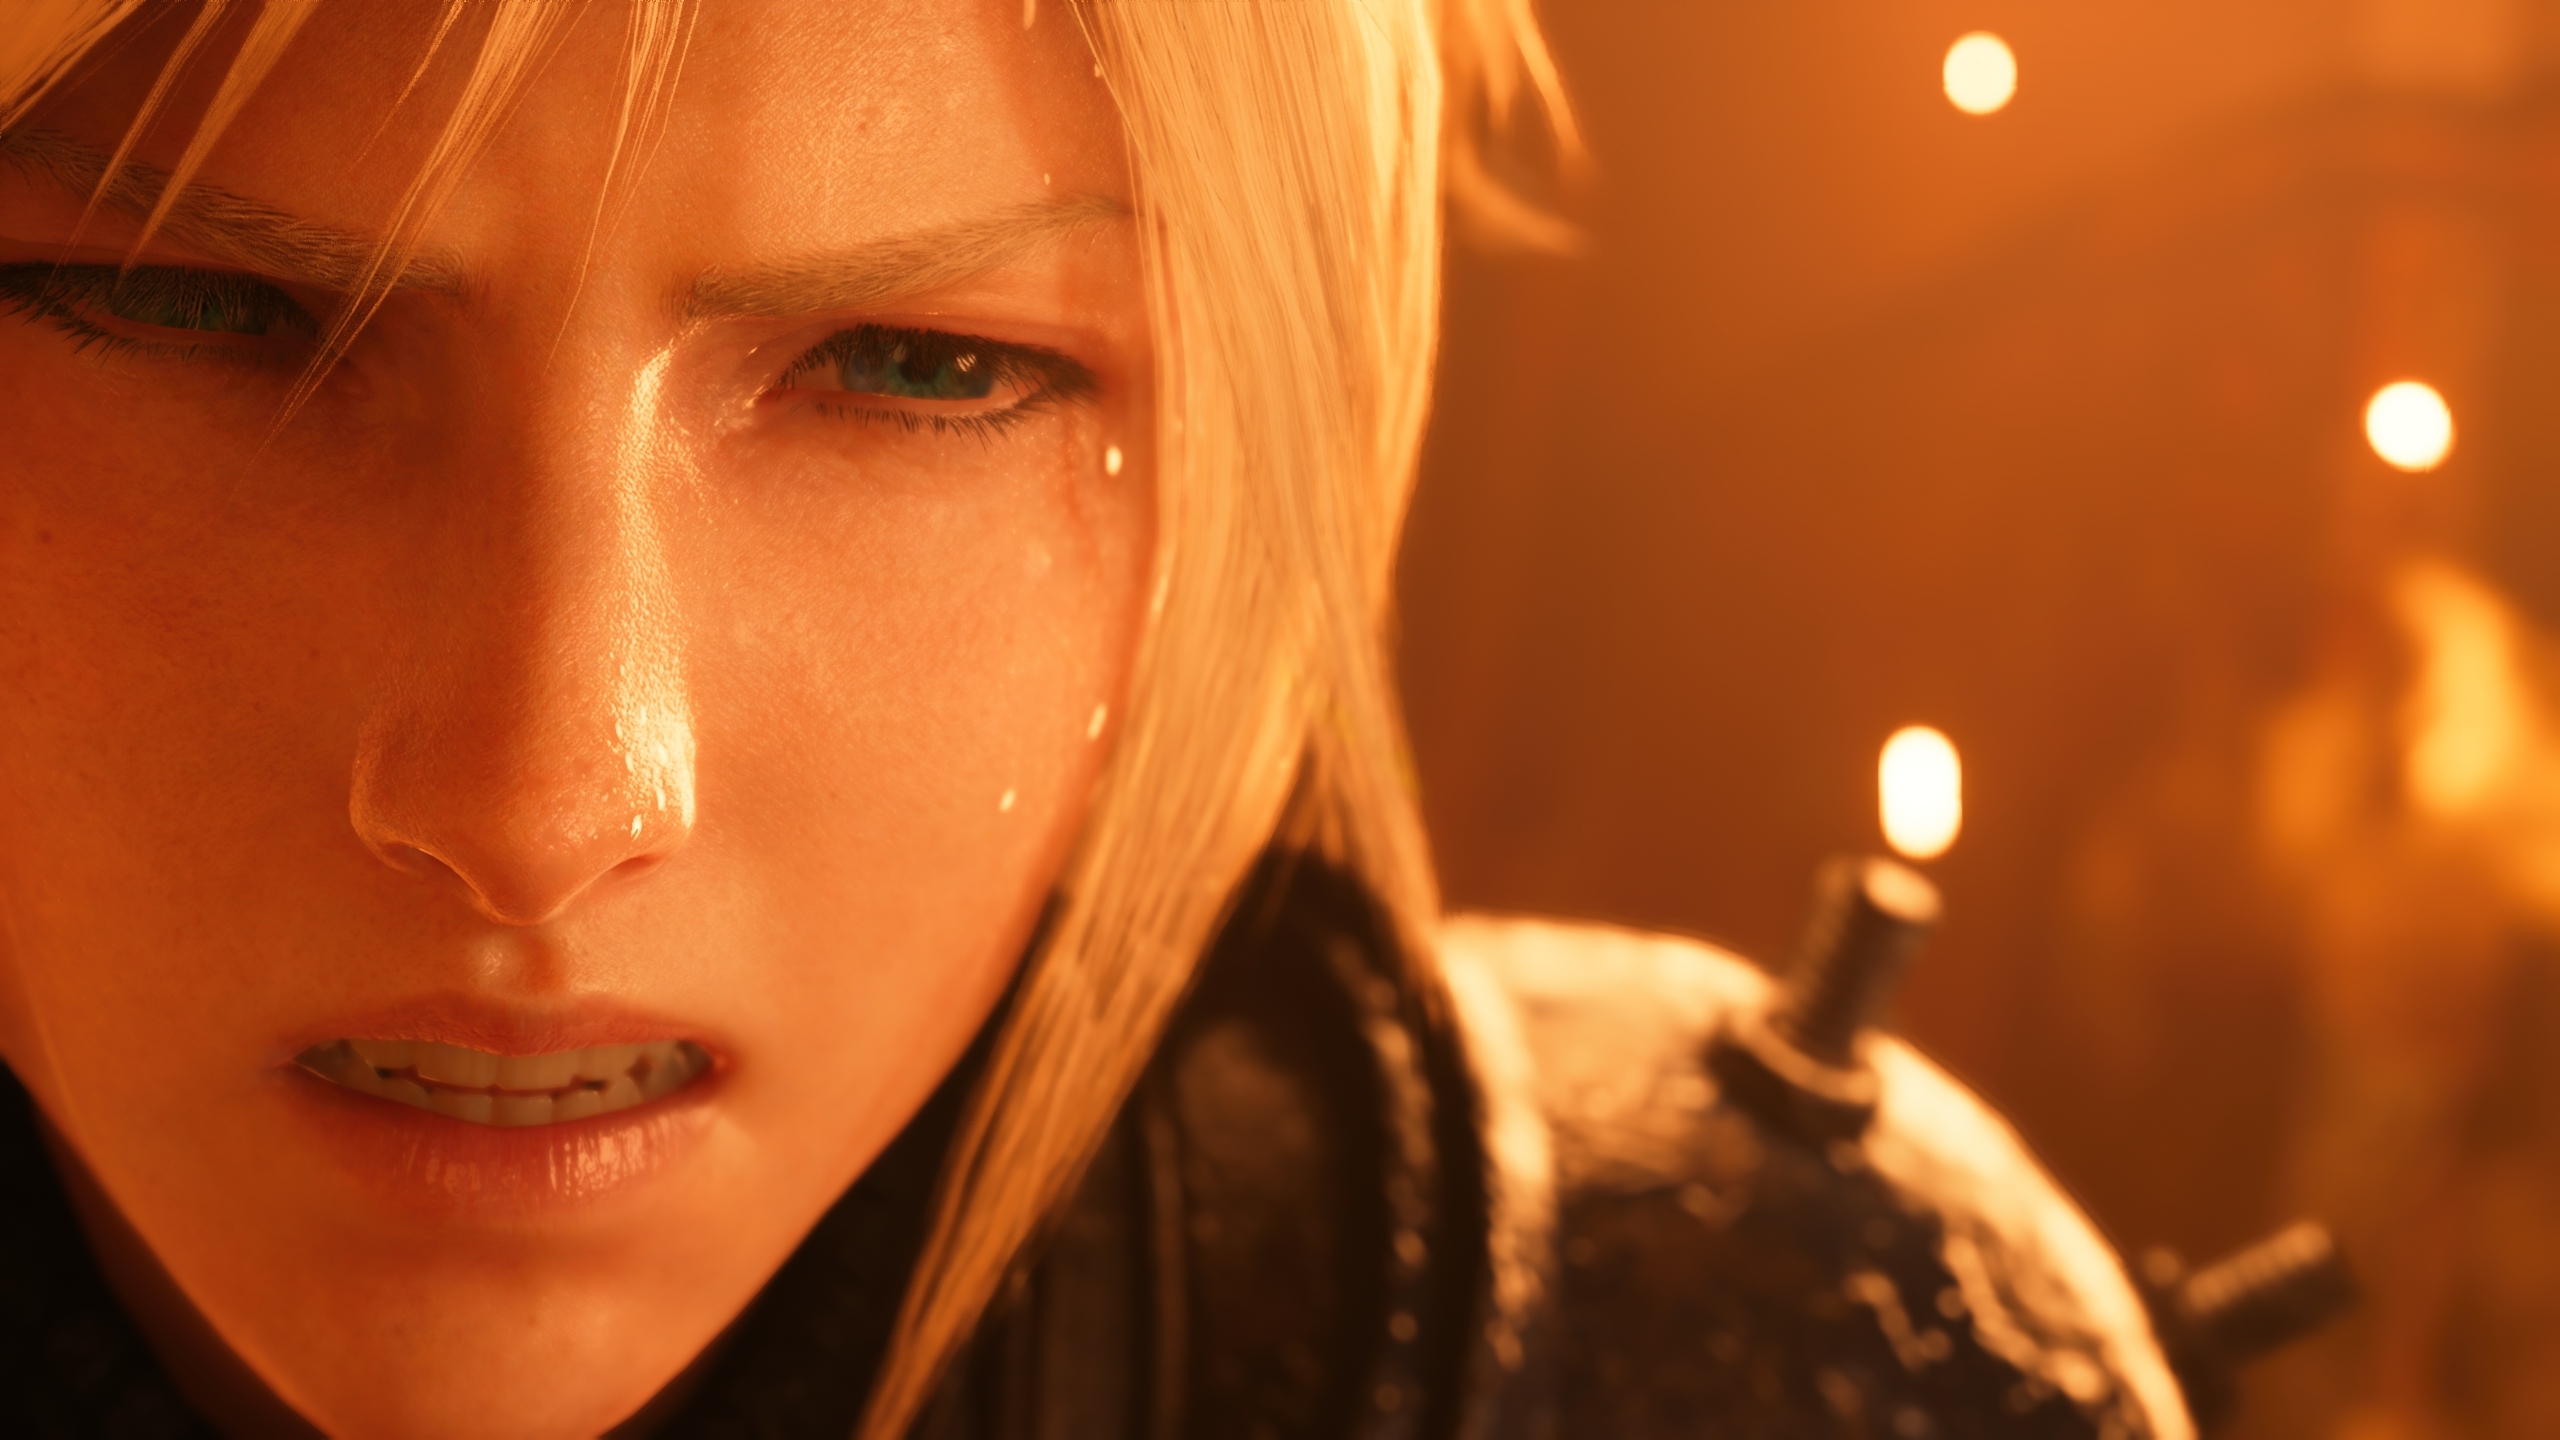 Final Fantasy 7 Remake's PC Port Is A Major Disappointment thumbnail